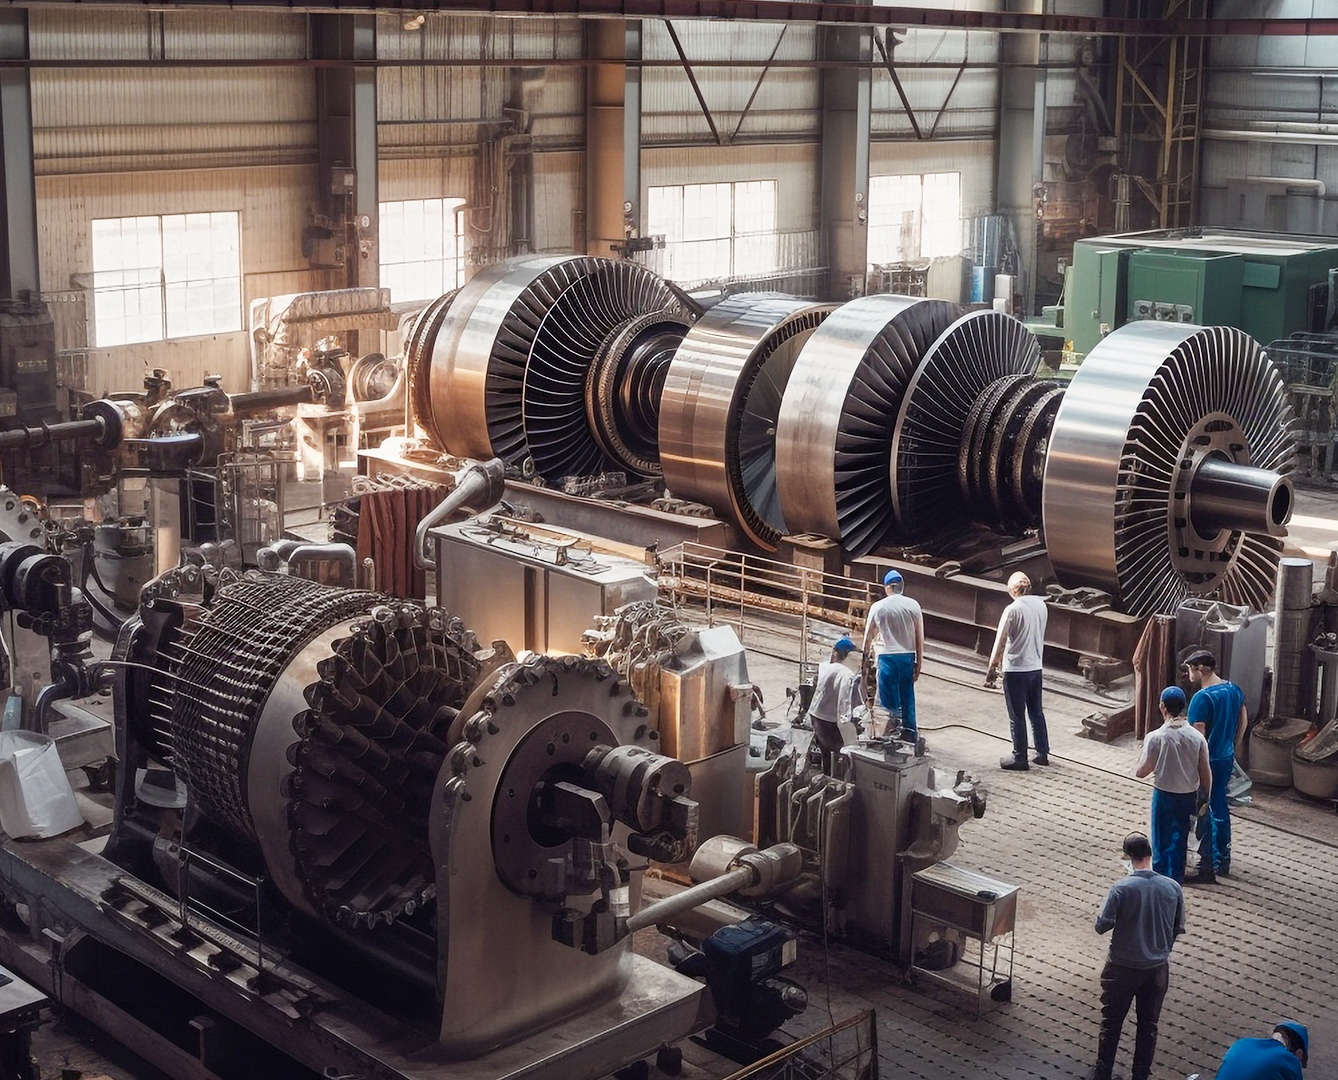 Electric motors, steam engines and processing units